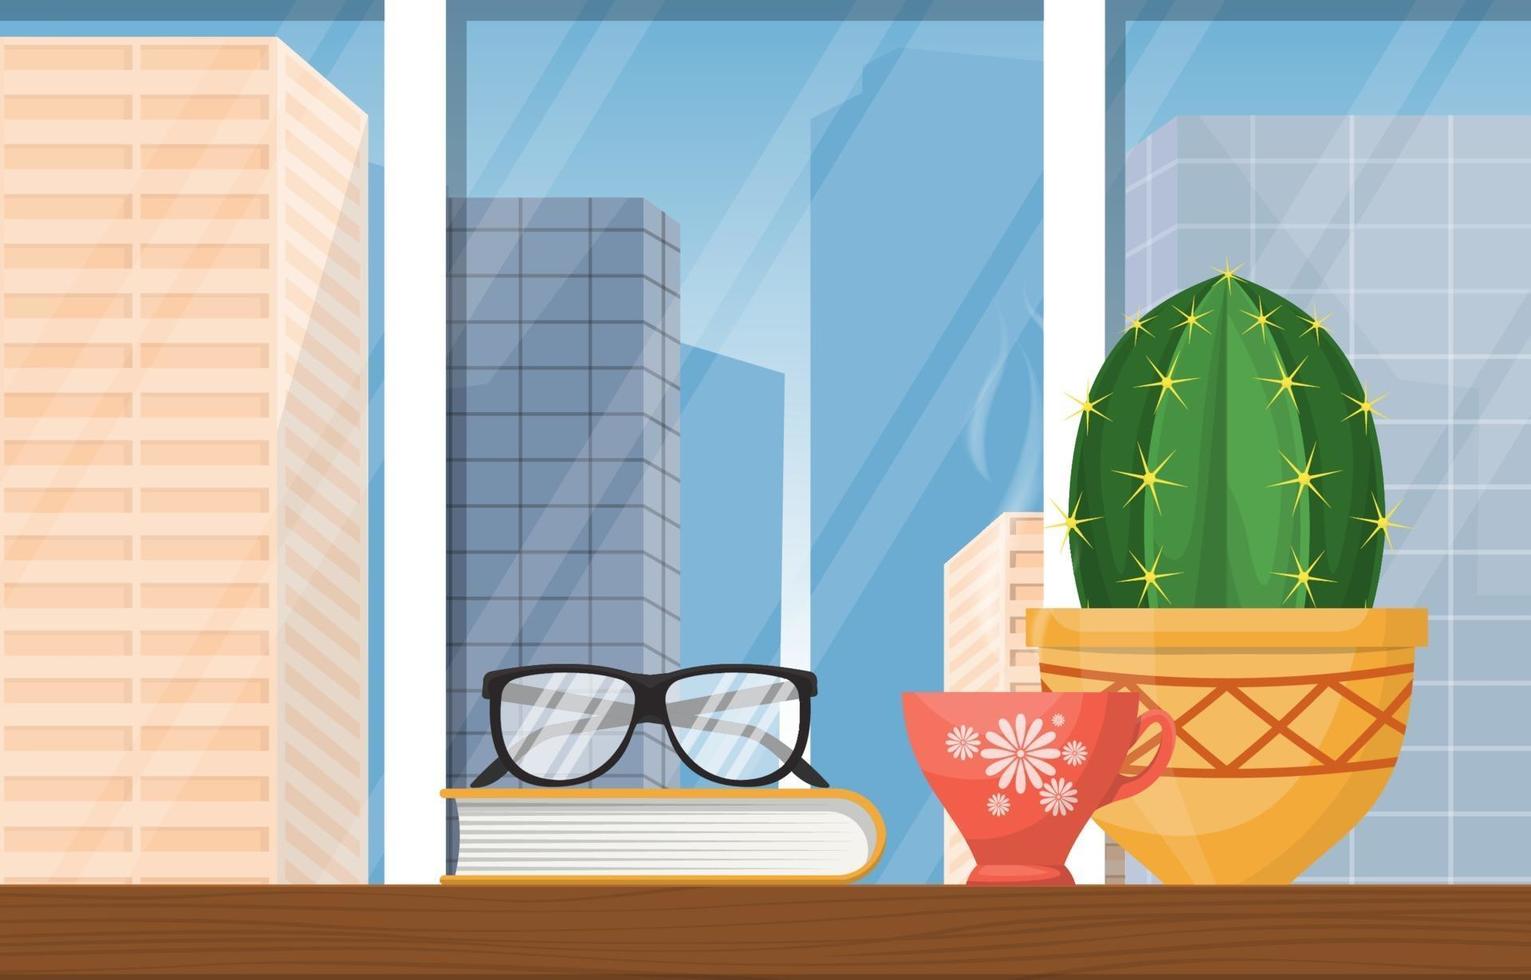 Hot Tea, Cactus, and Book on Table with City Skyline vector